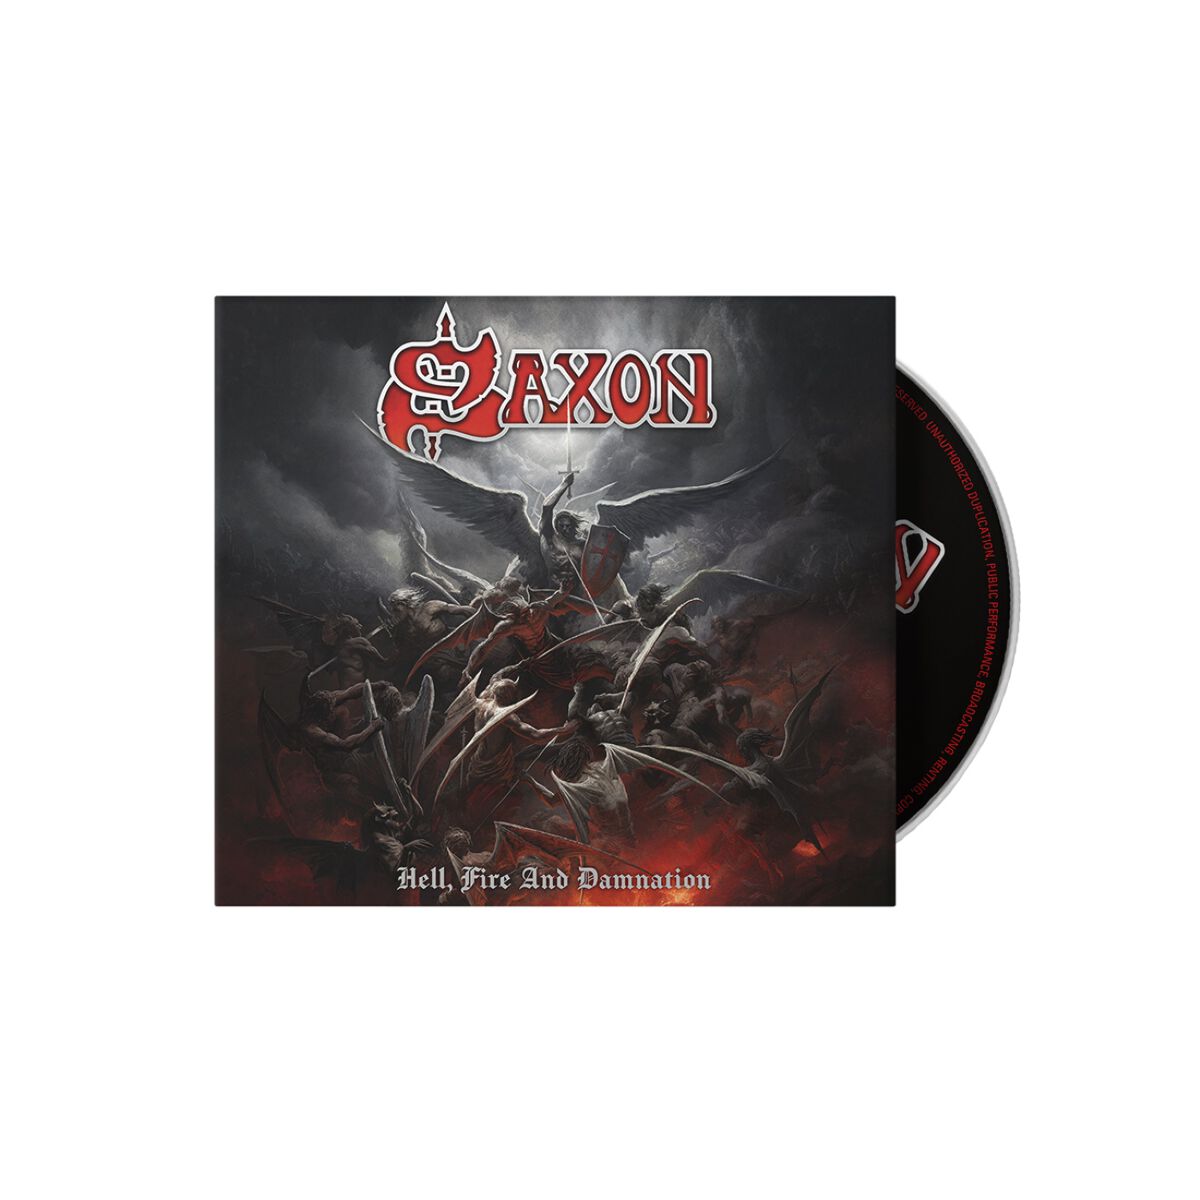 Image of CD di Saxon - Hell, fire and damnation - Unisex - standard